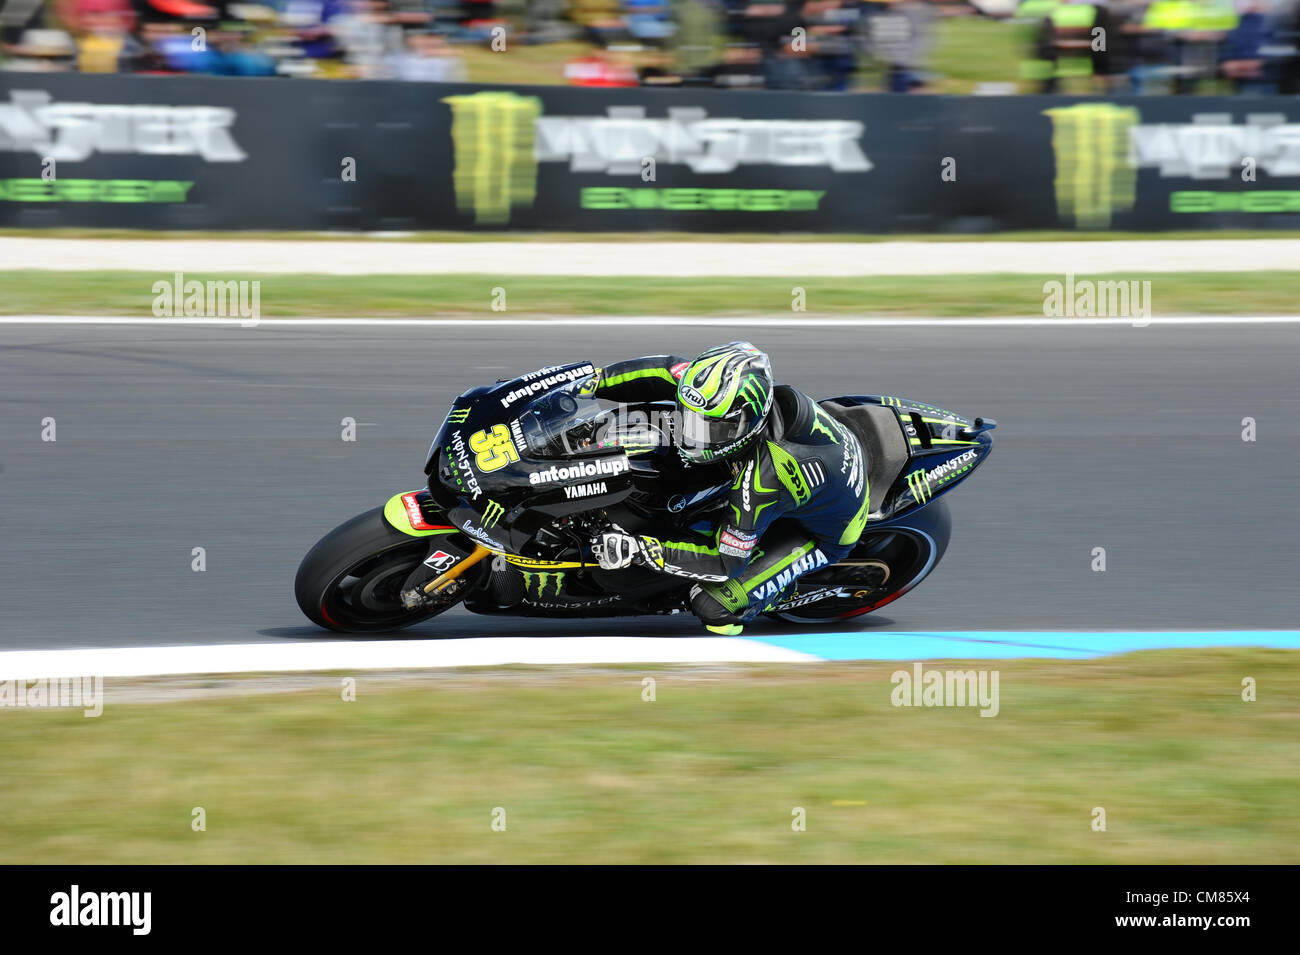 26.10.2012 Phillip Island,Melbourne, Australia. Cal Crutchlow riding his Yamaha YZR-M1 for team Monster Tech 3 Yamaha during the practice rounds of the Air Asia  Australian Moto GP at the Phillip Island circuit. Stock Photo